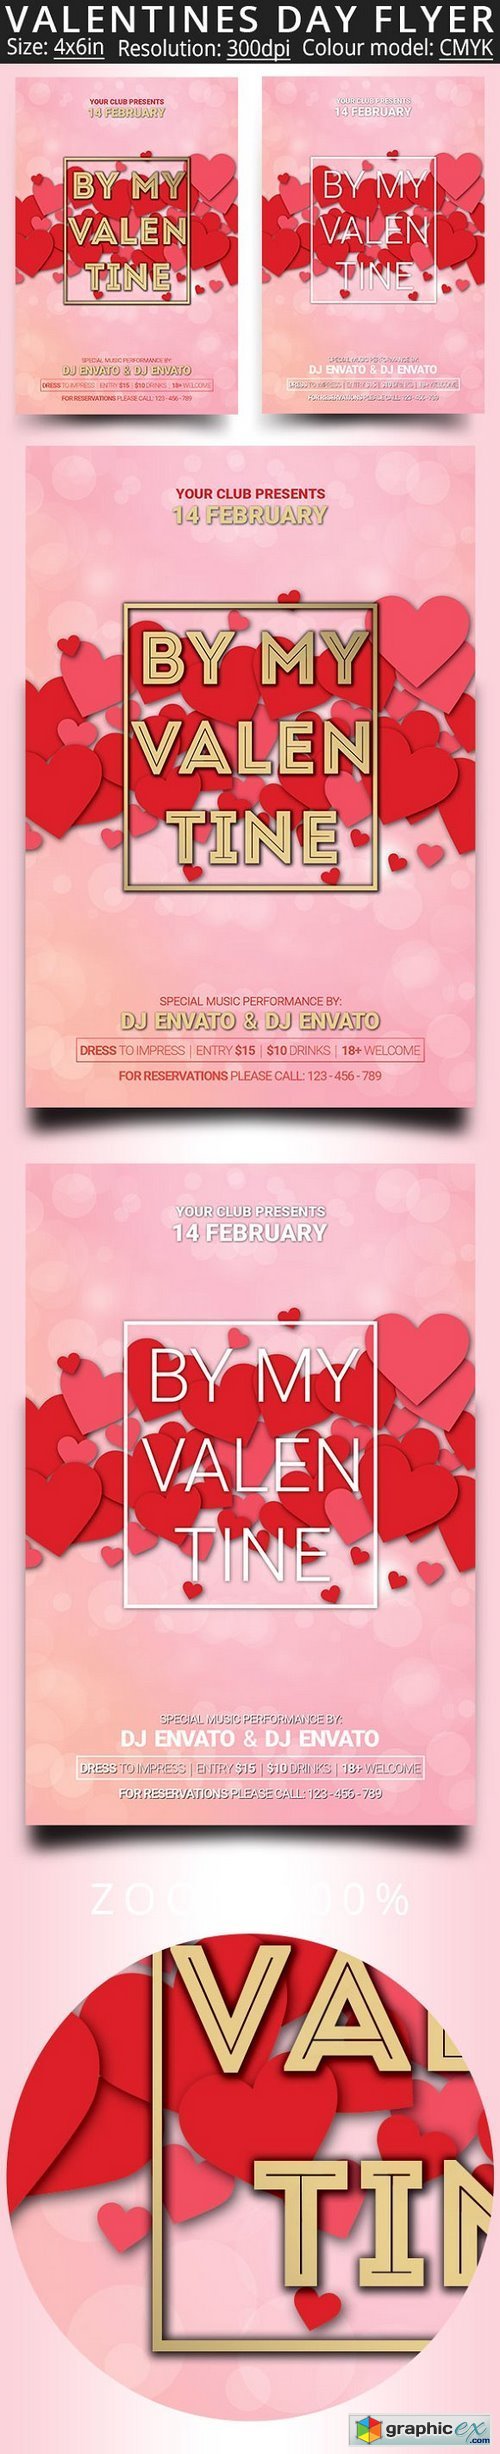 Valentines Day Party Flyer 1163336